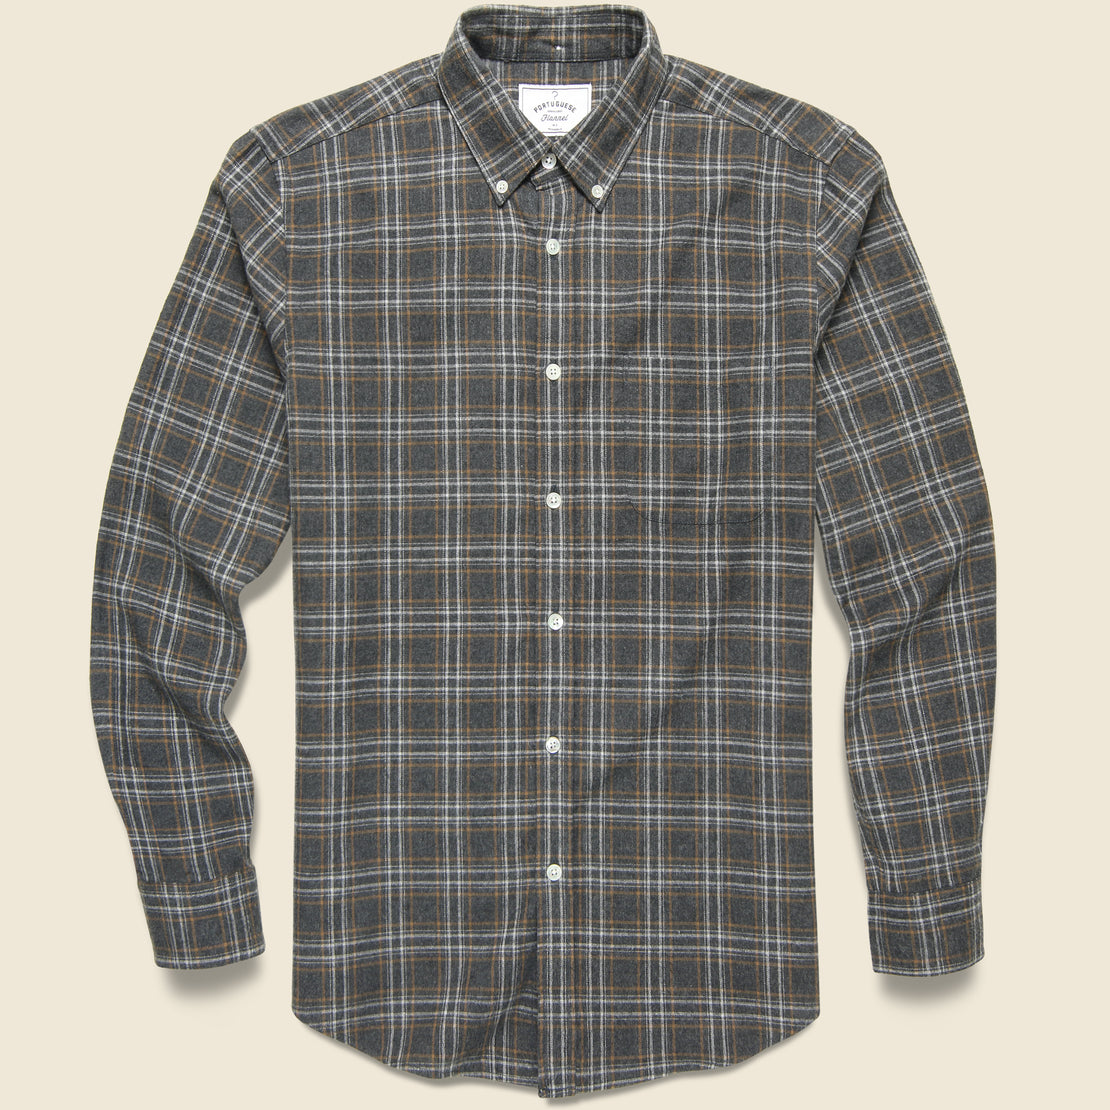 Portuguese Flannel Mill Shirt - Grey/Brown